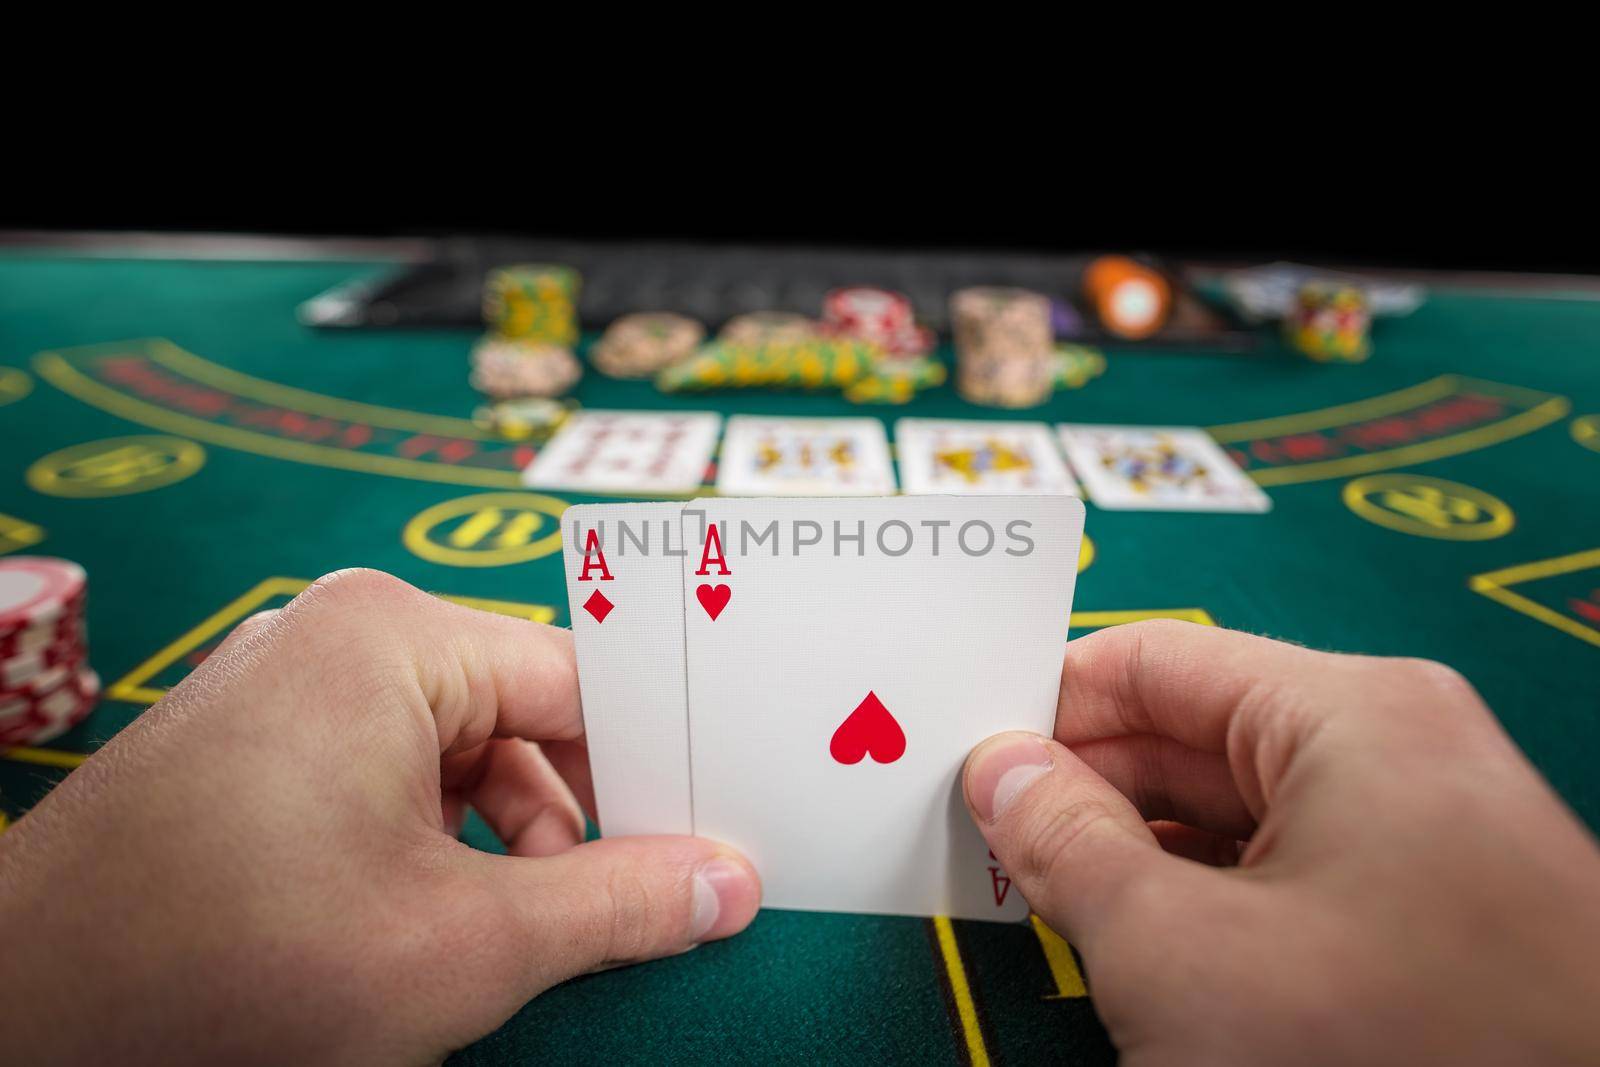 Male poker player holding the of two cards aces at green casino table